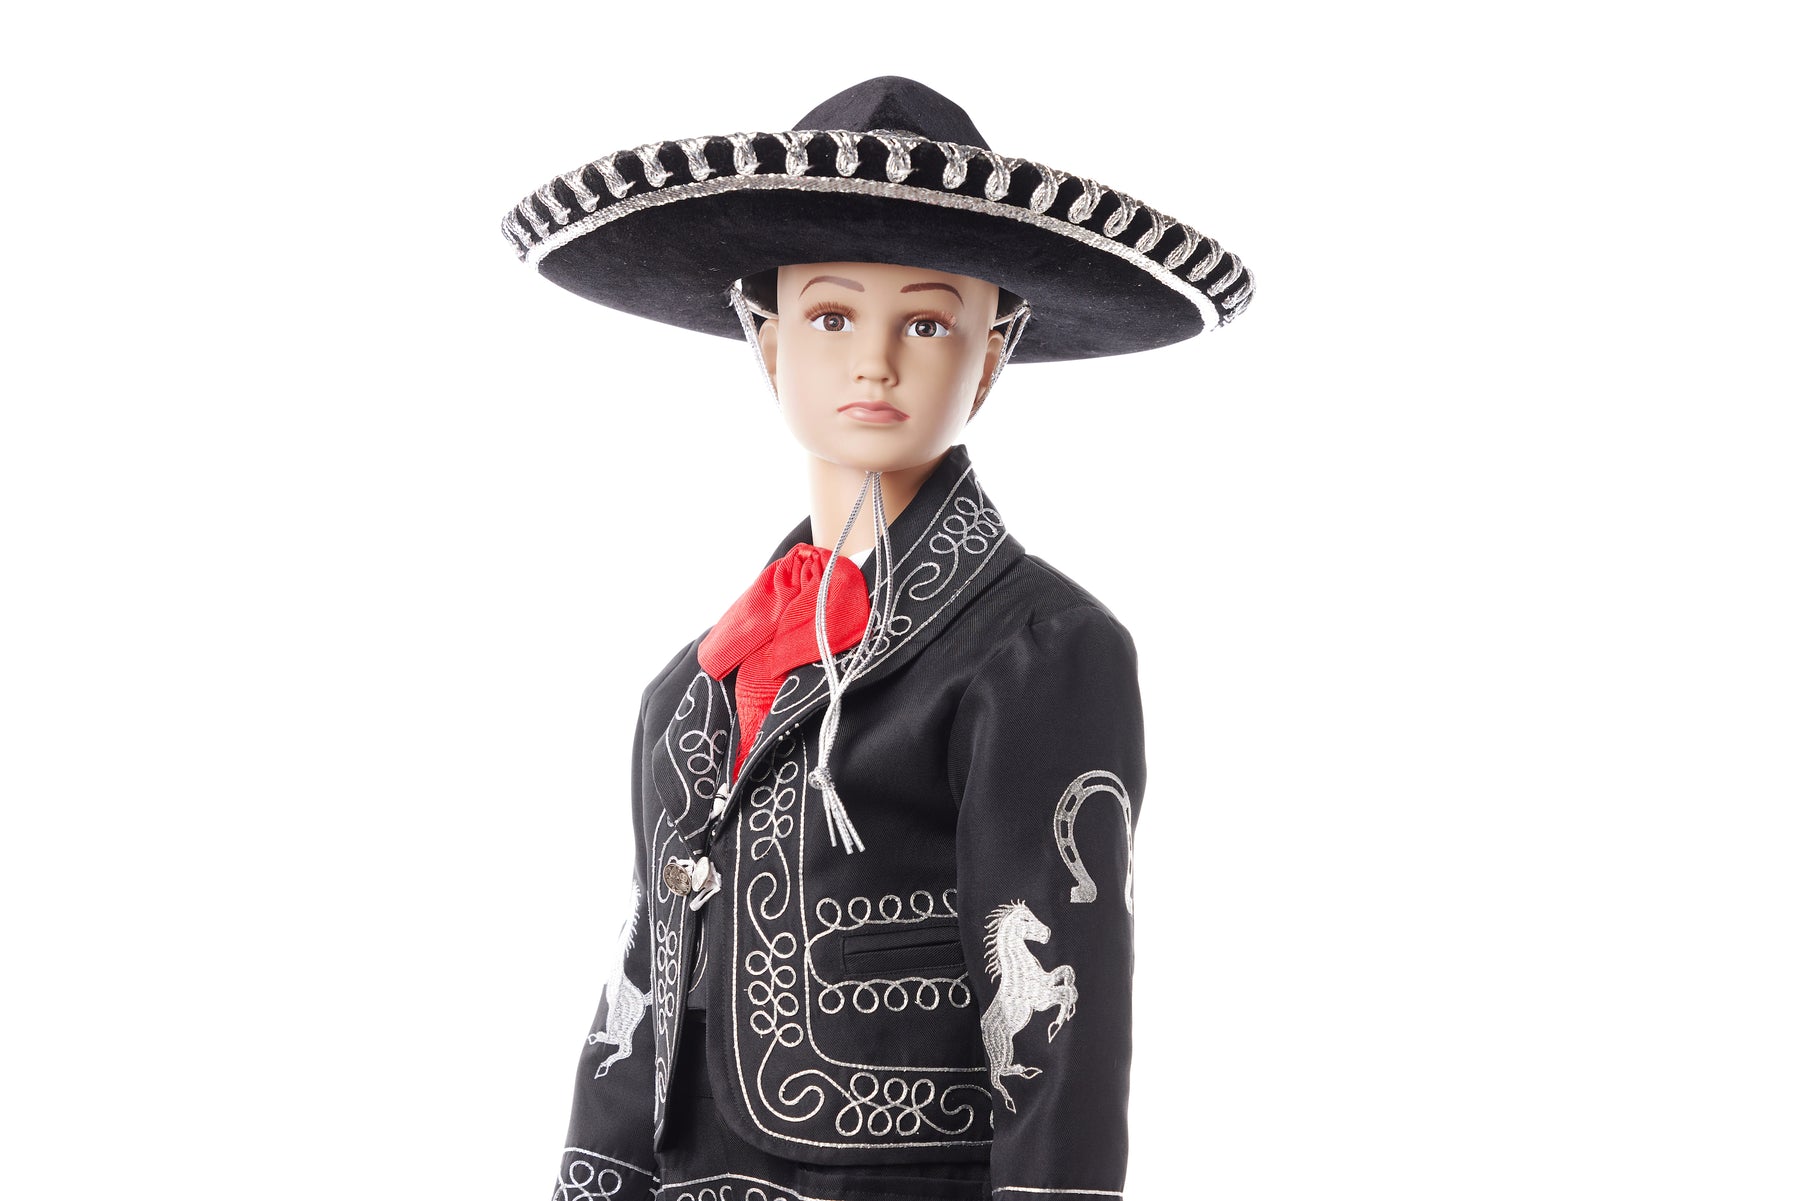 Boys Charro Baptism Outfit - Black & Silver - Horse